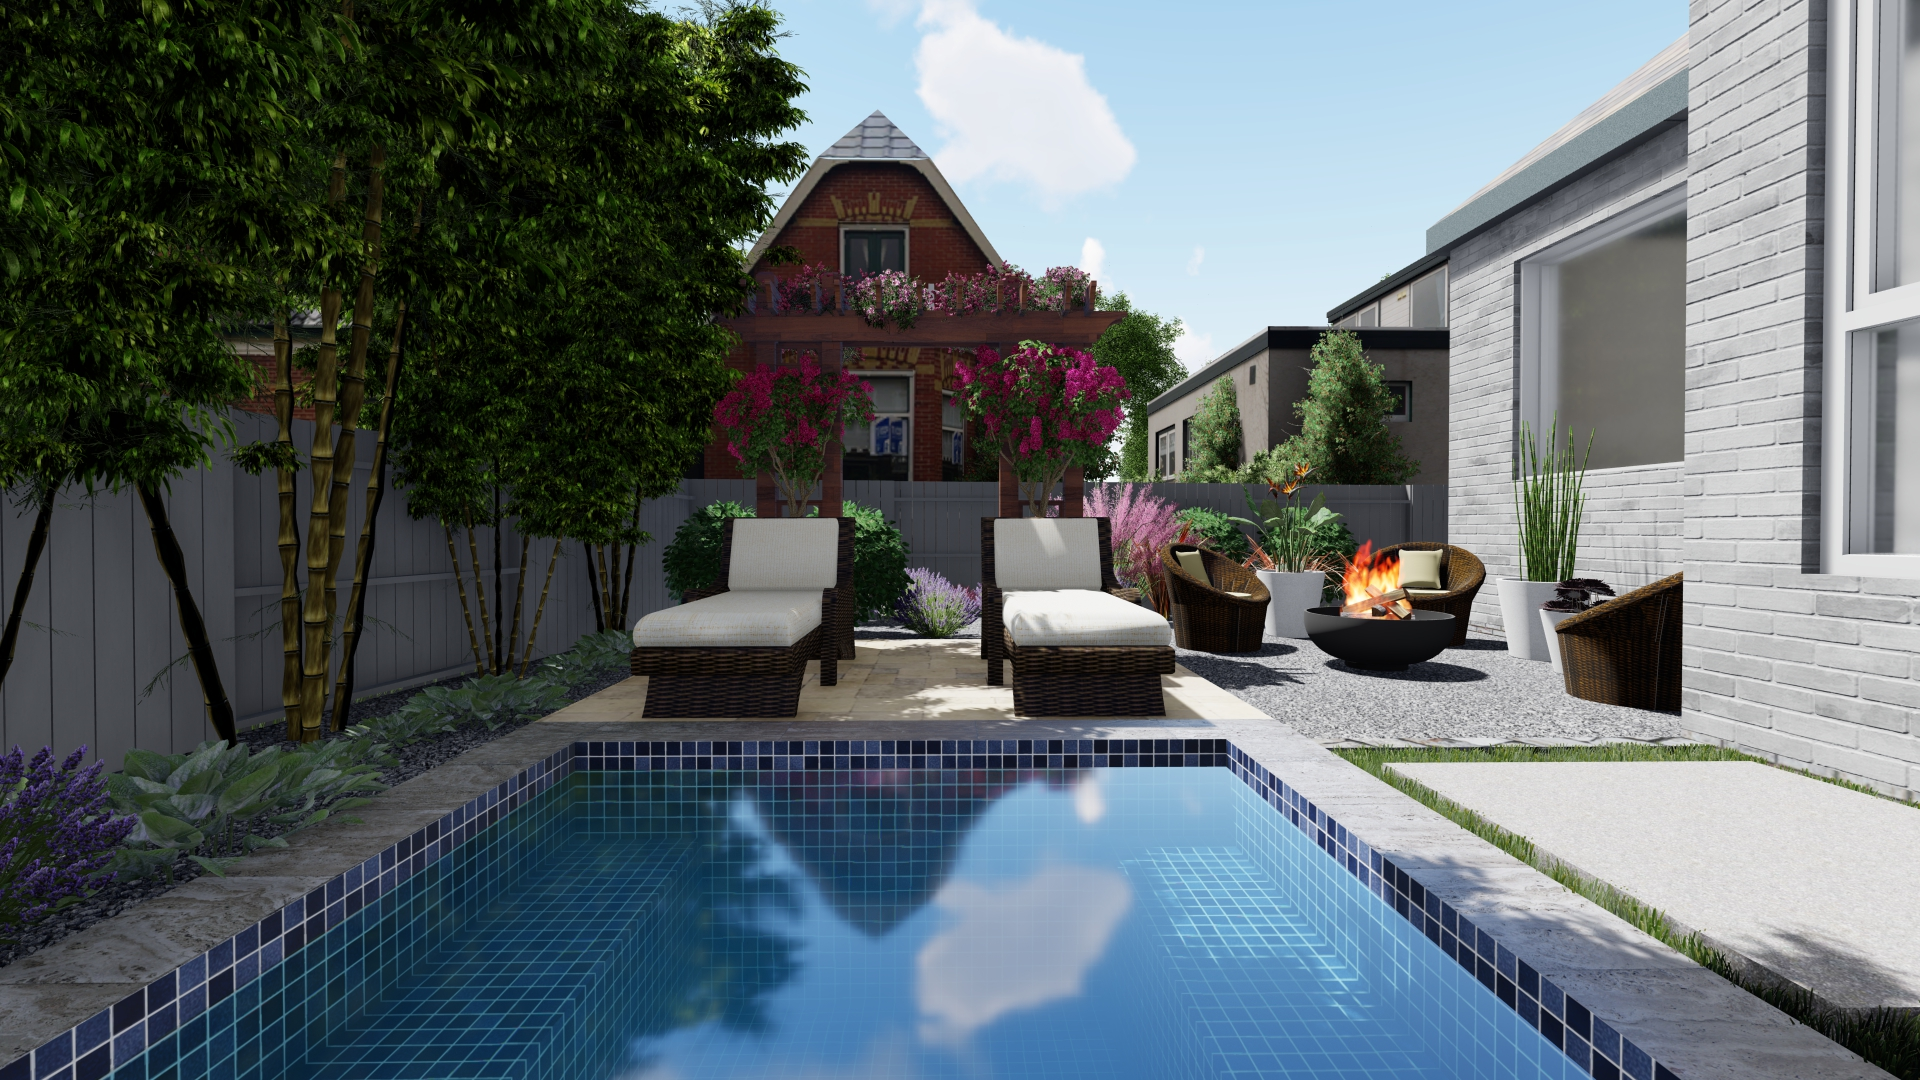 A small swimming pool with patio furniture next to it